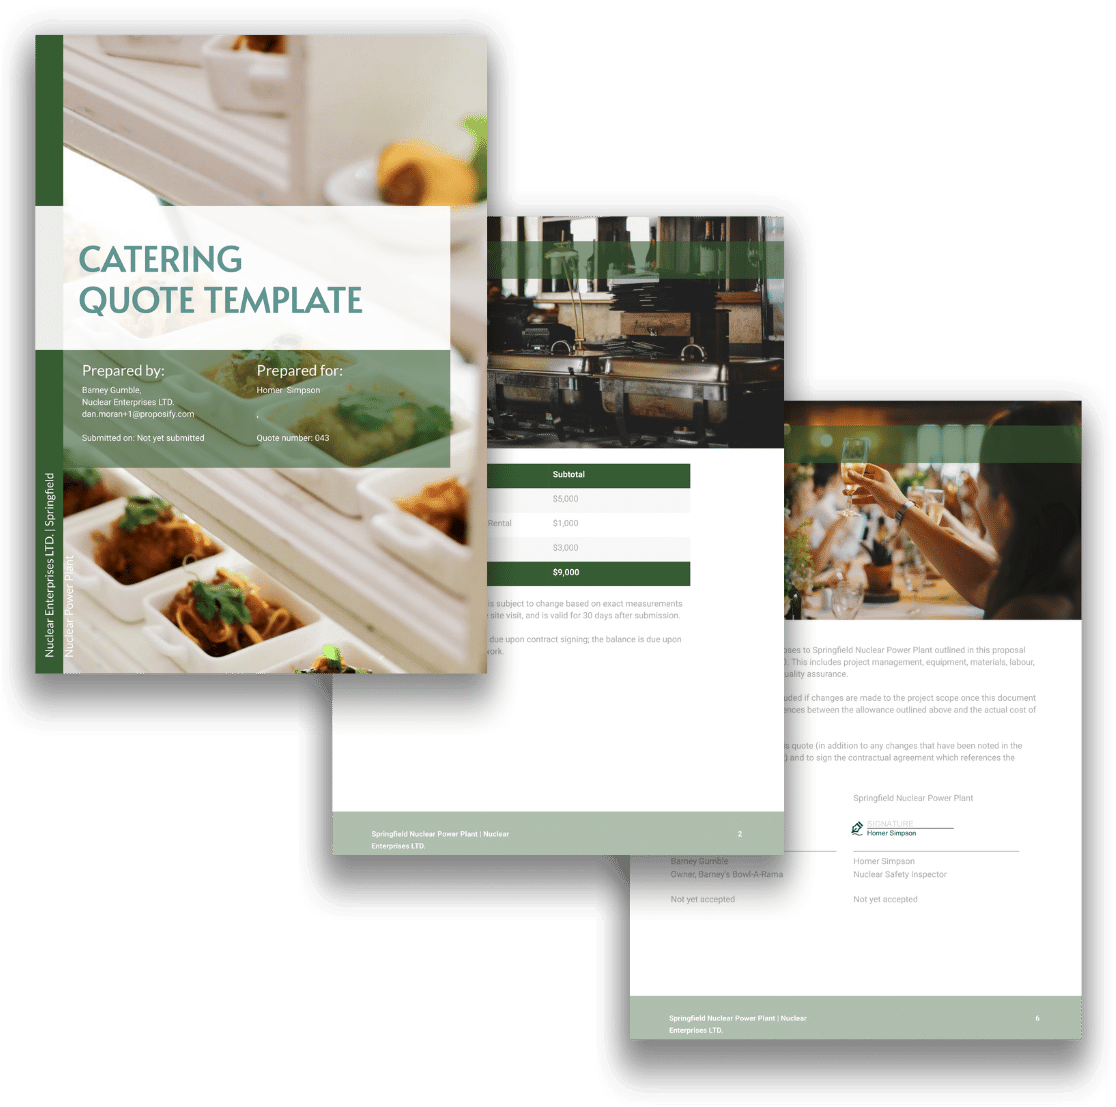 Catering quote template